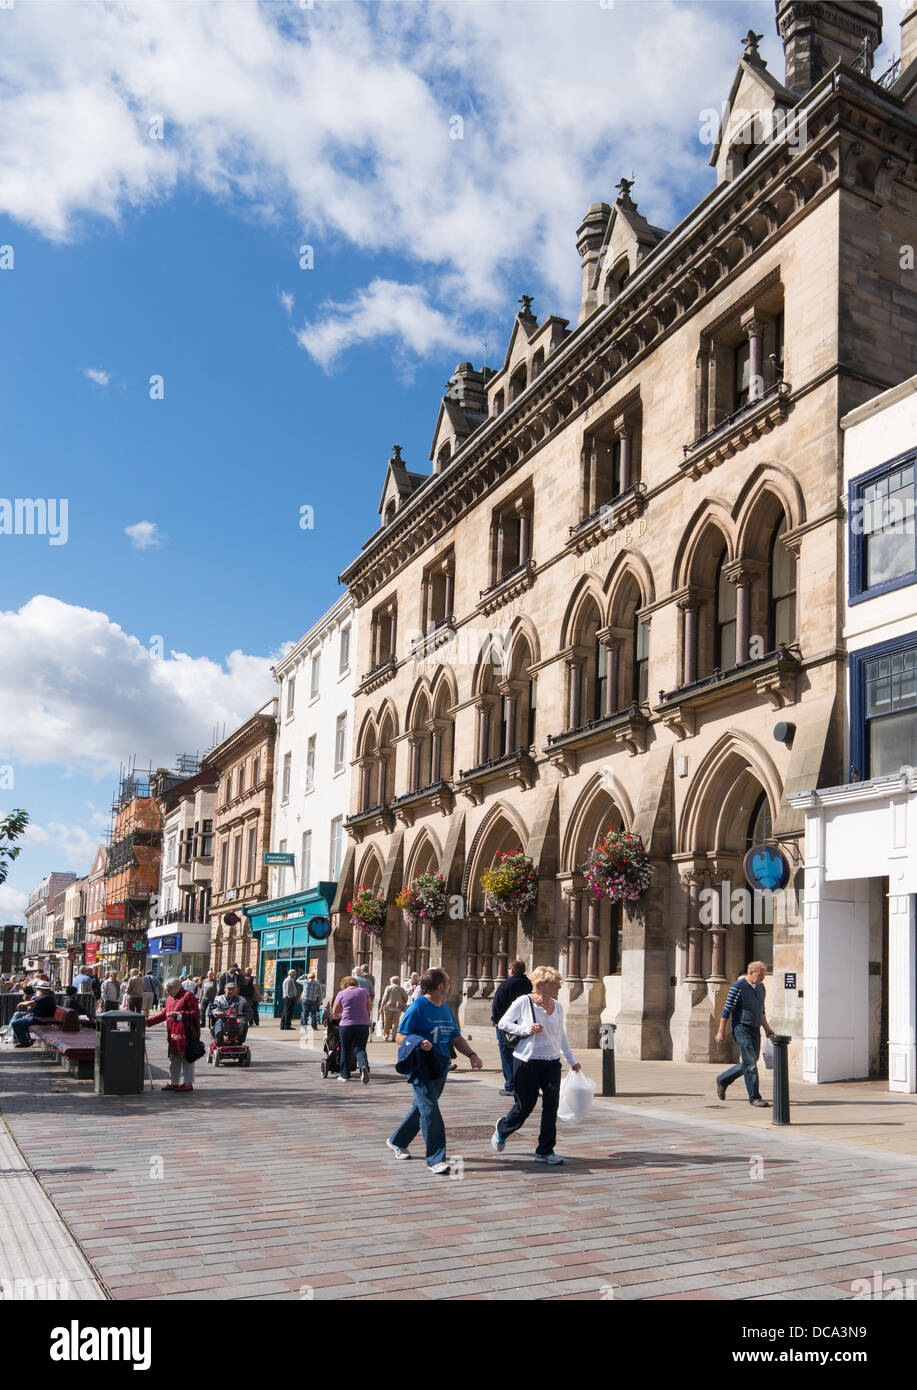 People shopping Darlington High Row (High street) or town centre, Co. Durham, England Stock Photo